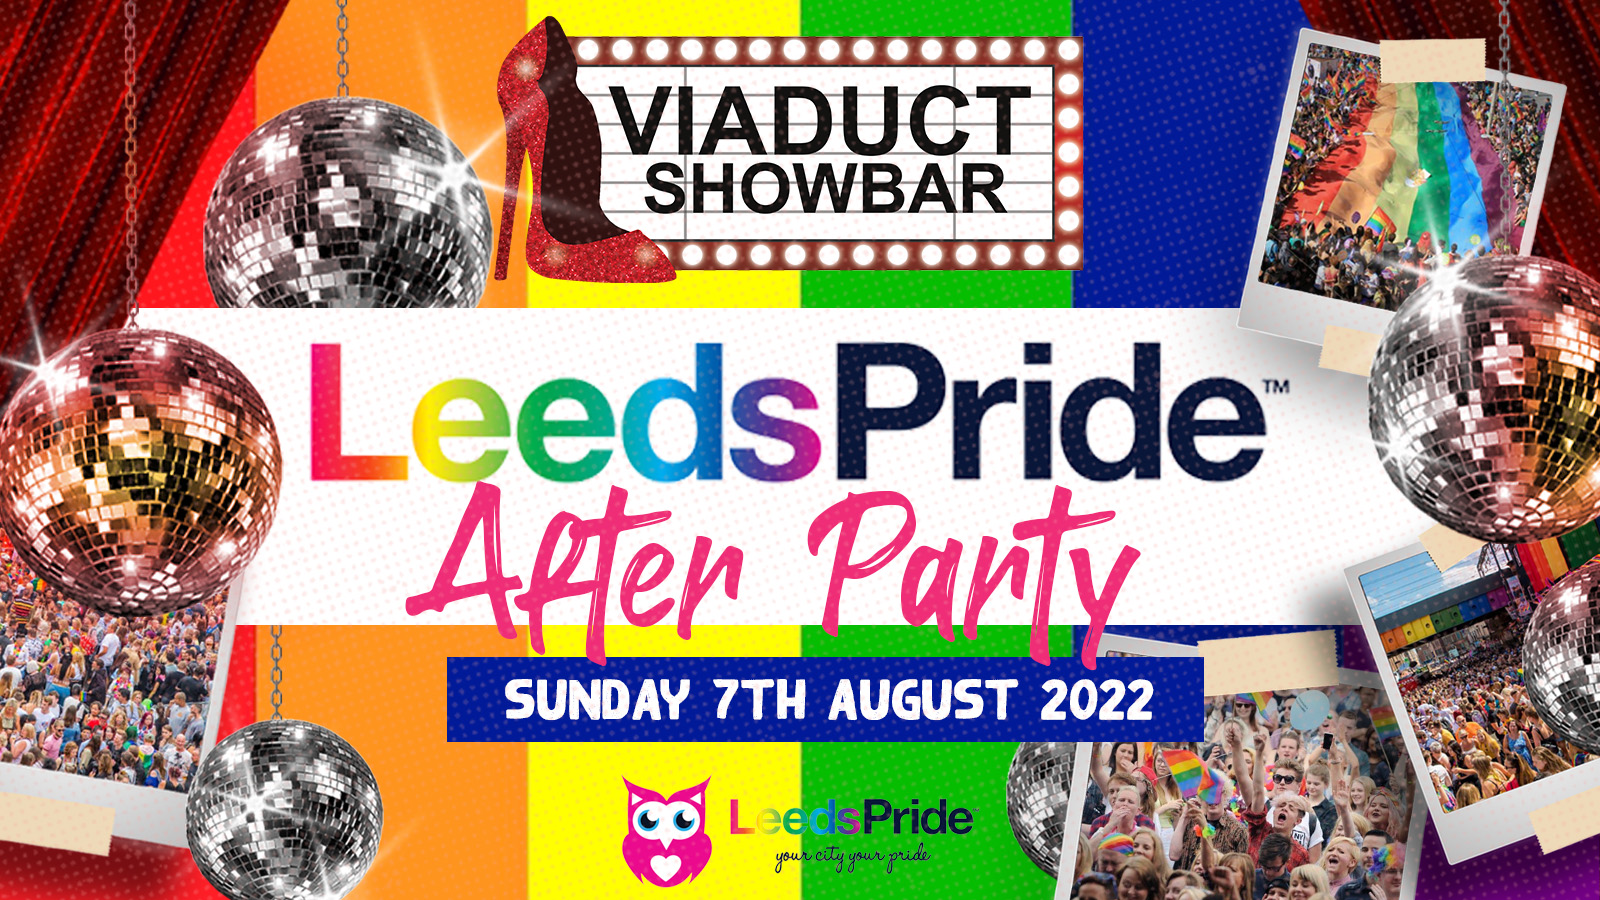 PRIDE AFTERPARTY @ The Viaduct Showbar 7th August at Viaduct Showbar, Leeds  on 7th Aug 2022